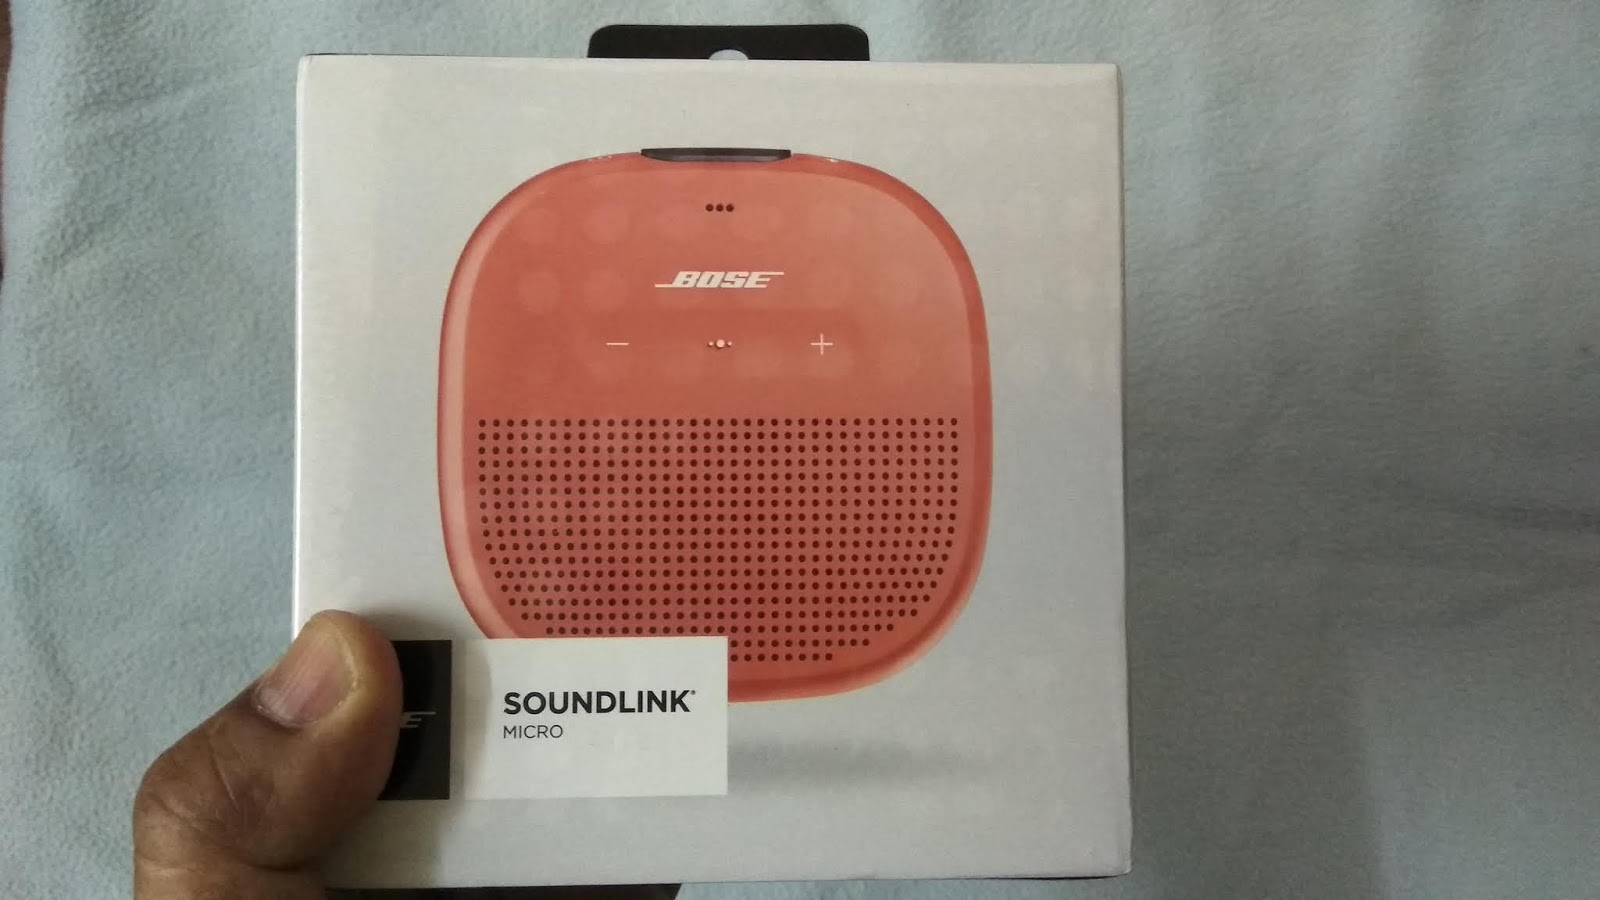  Unboxing the Bose SoundLink Micro Bluetooth speaker